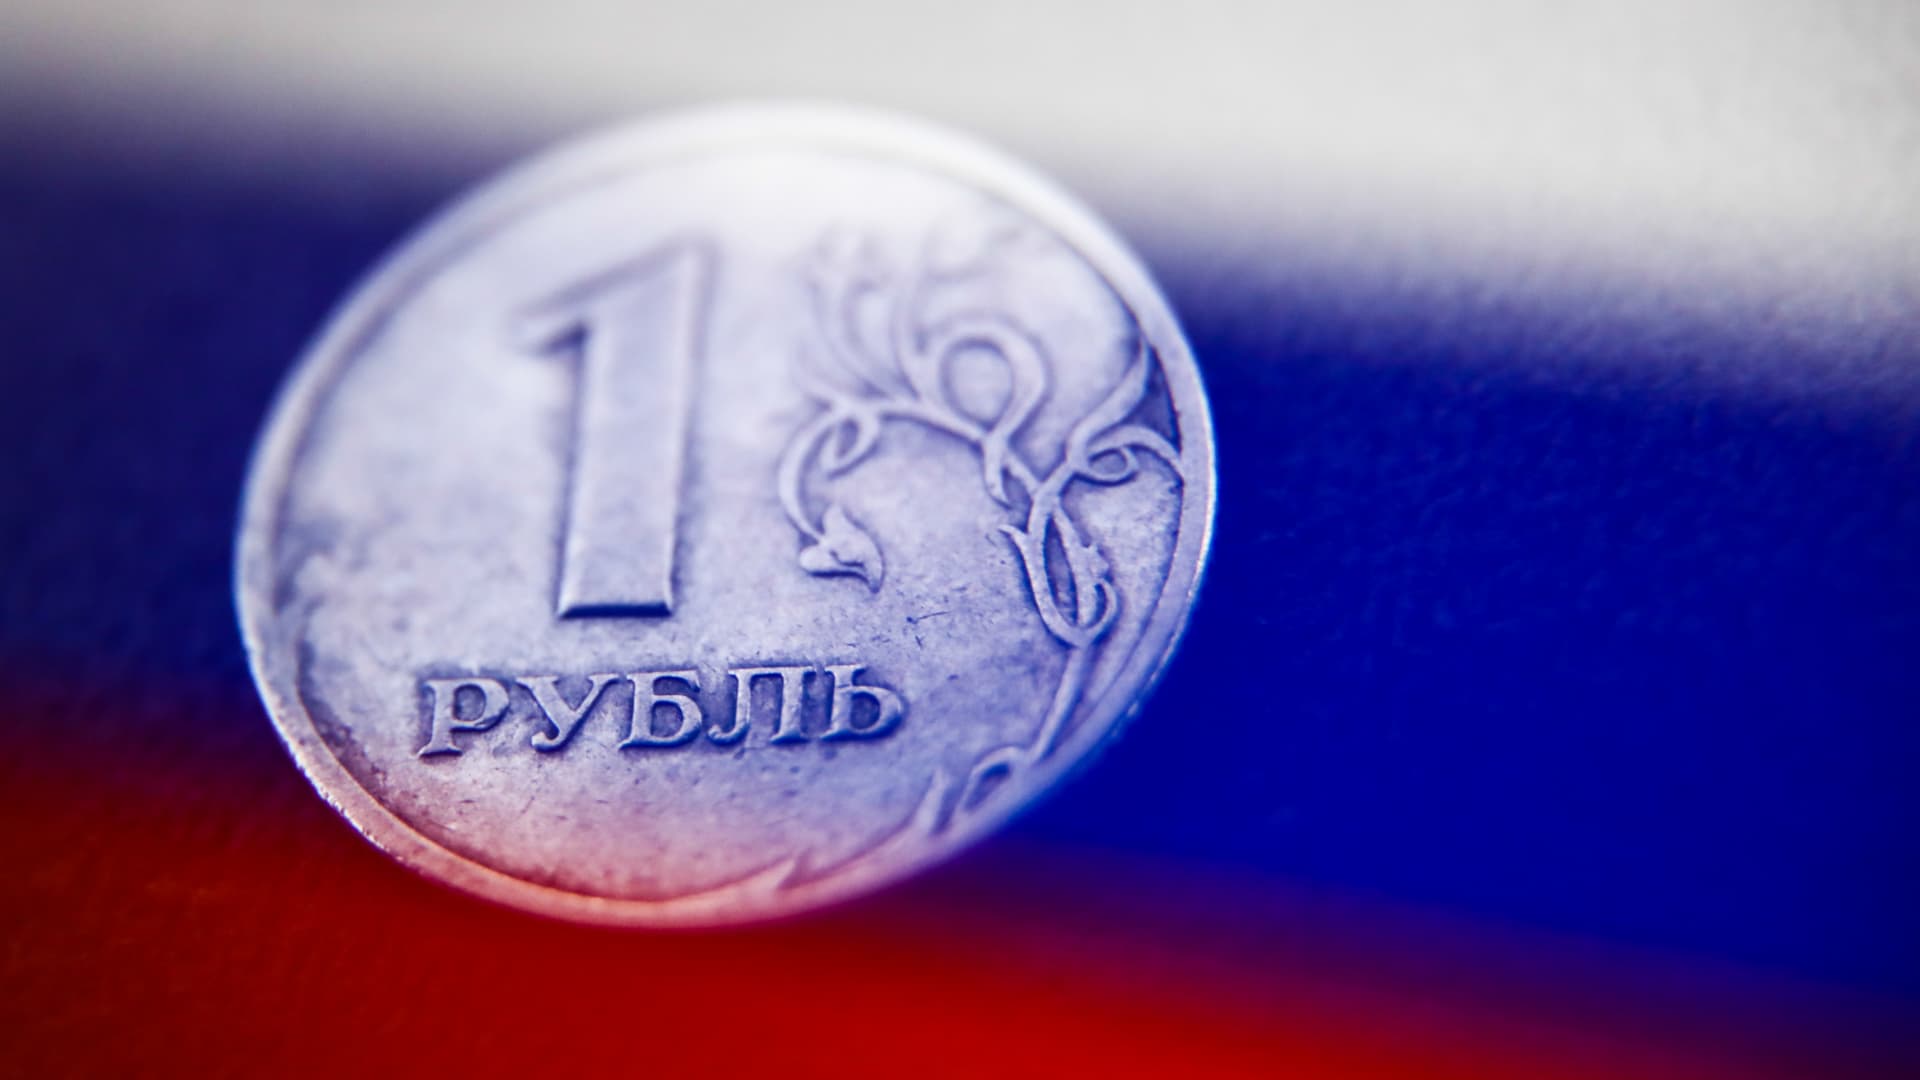 Russia's ruble is at its strongest level in 7 years despite massive sanctions. Here's why